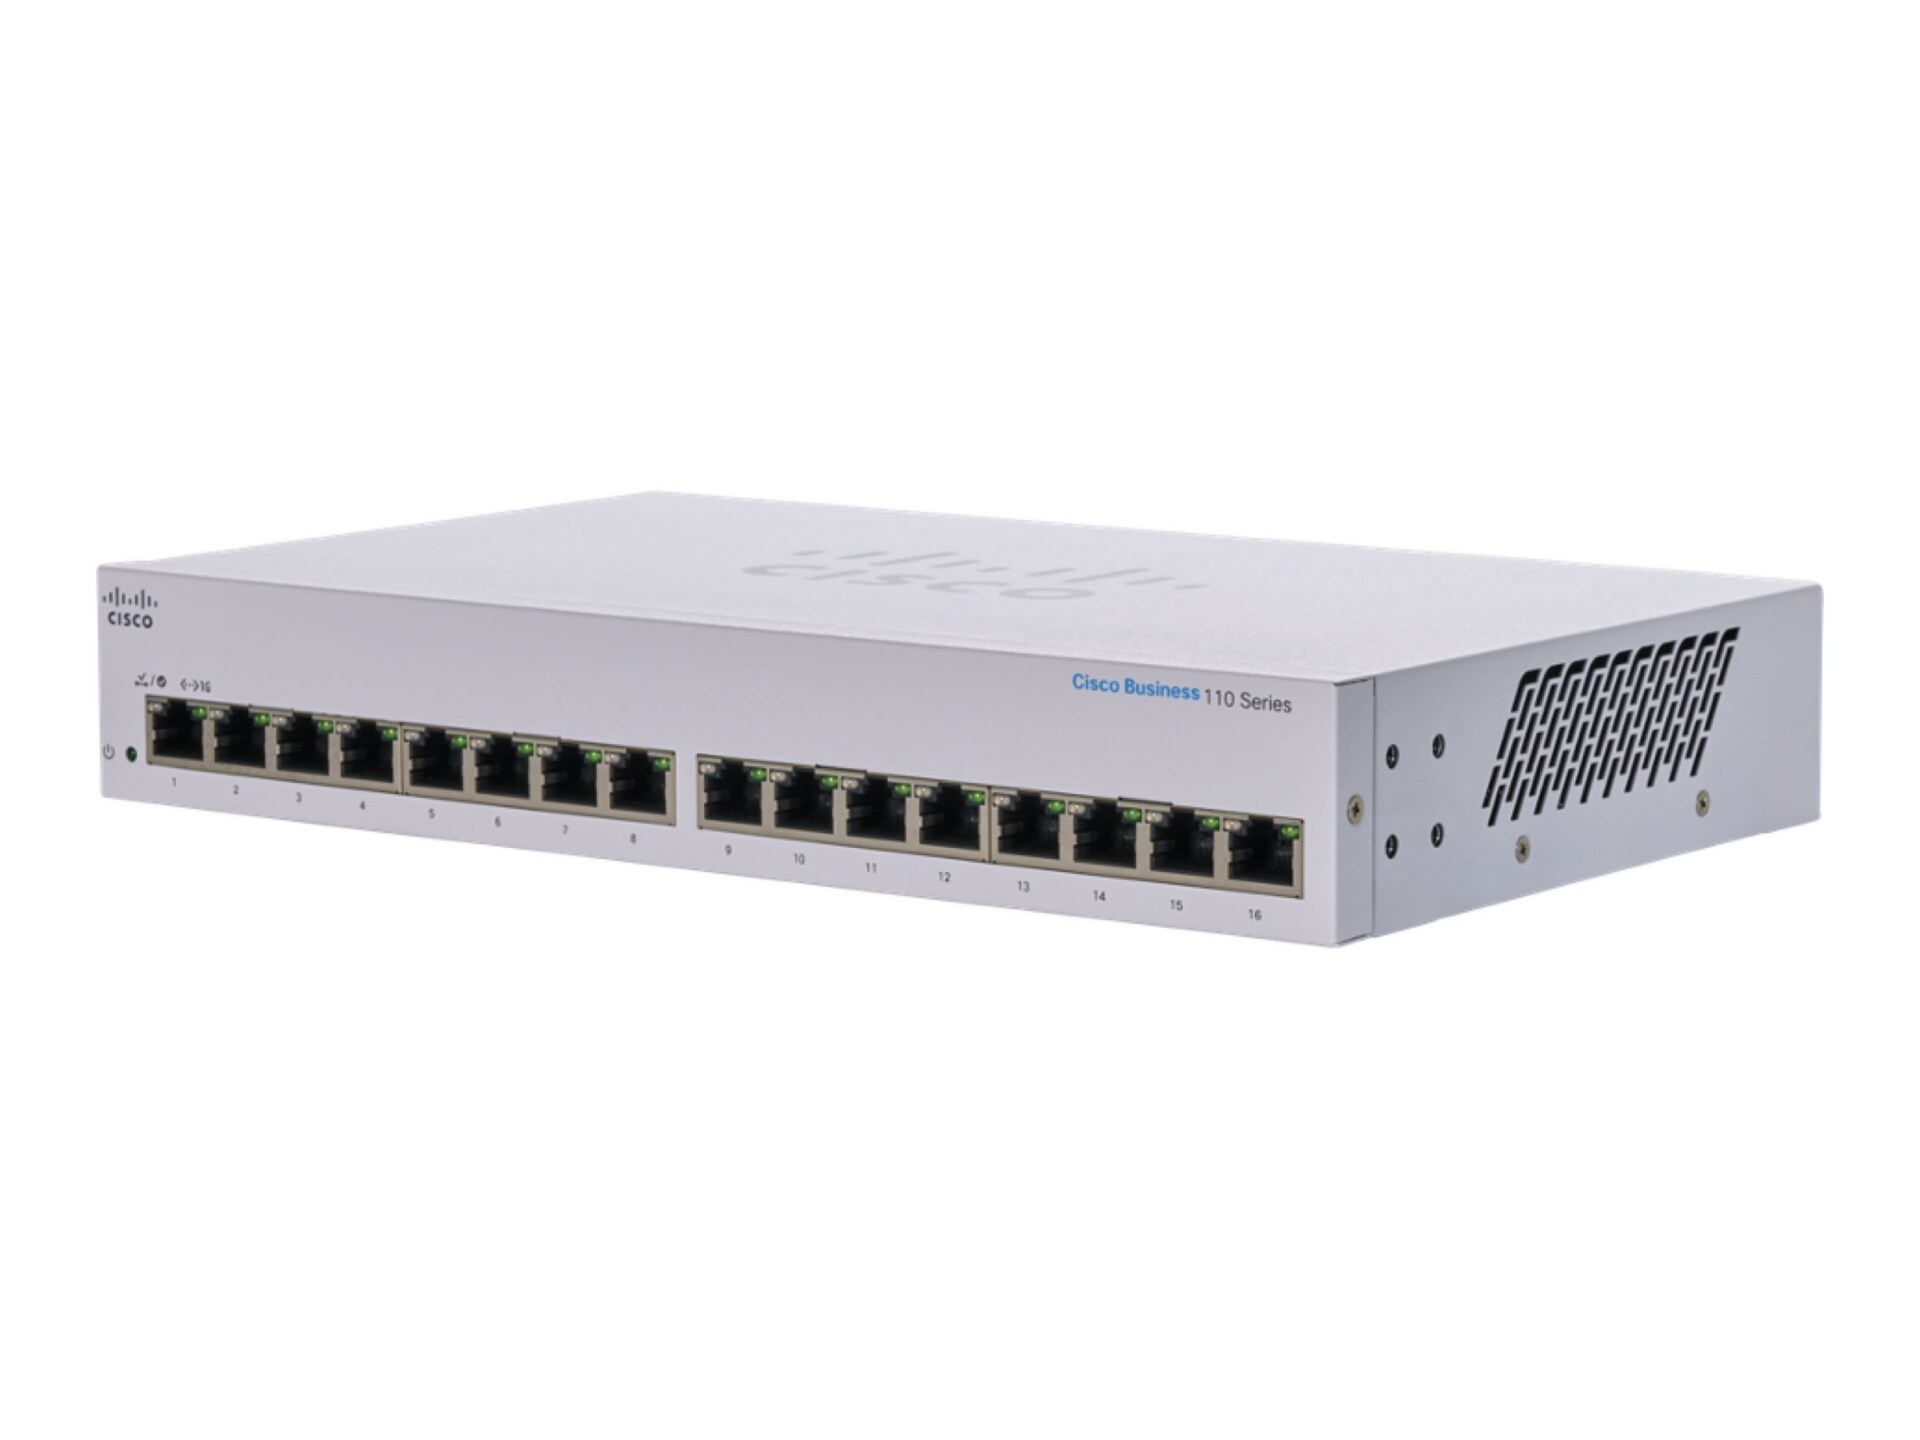 Cisco Business 110 Series 110-16T - switch - 16 ports - unmanaged - rack-mountable